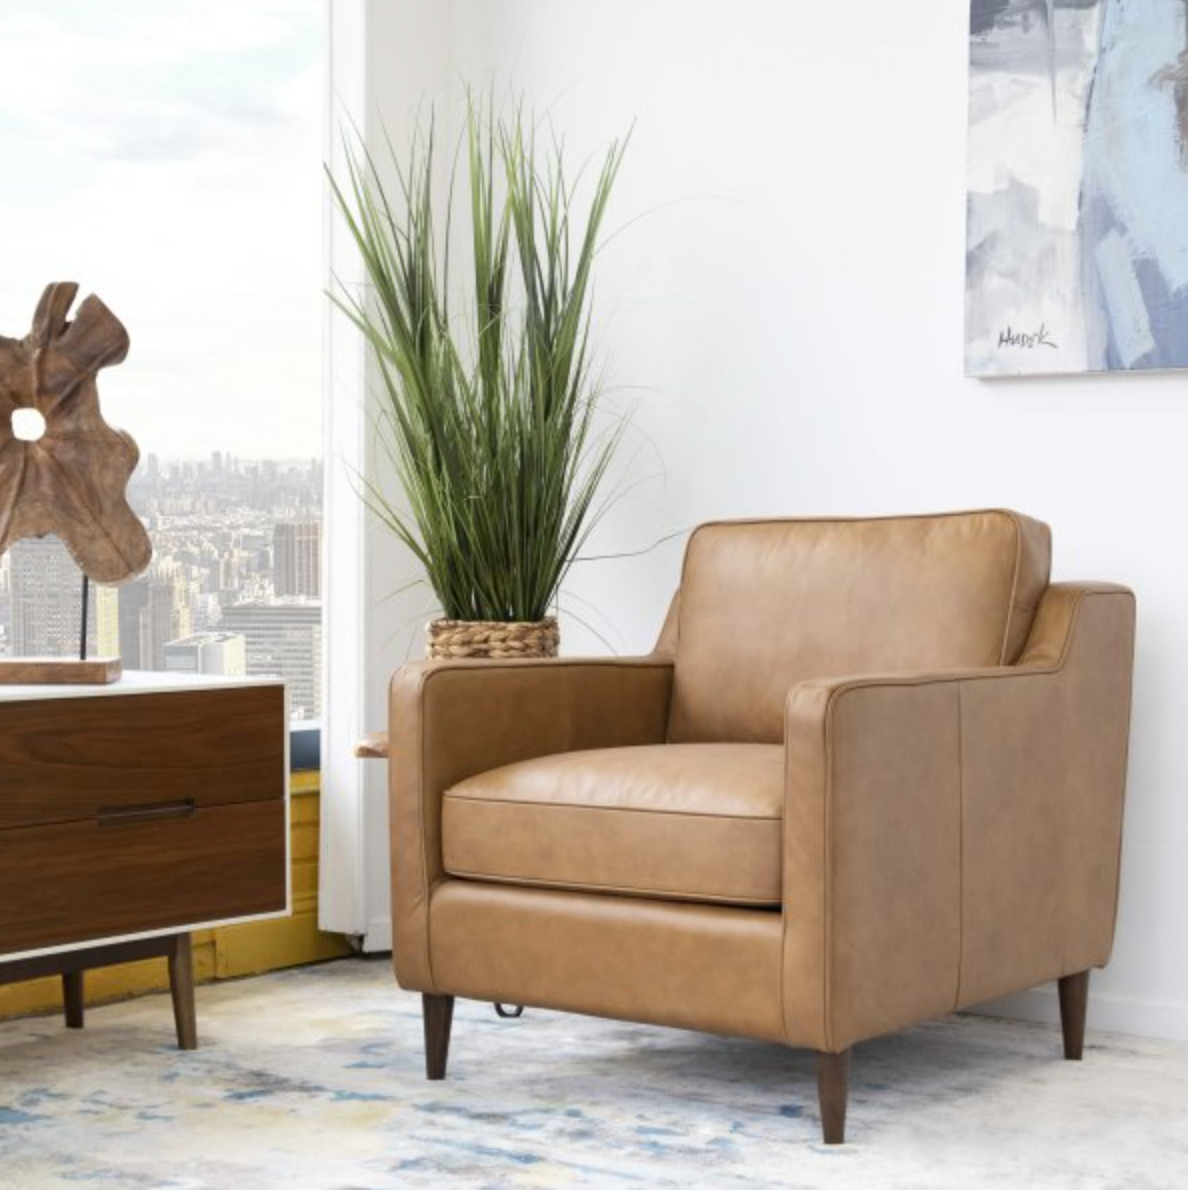 Madison Mid-Century Cushion Back Genuine Leather Upholstered Armchair in Tan